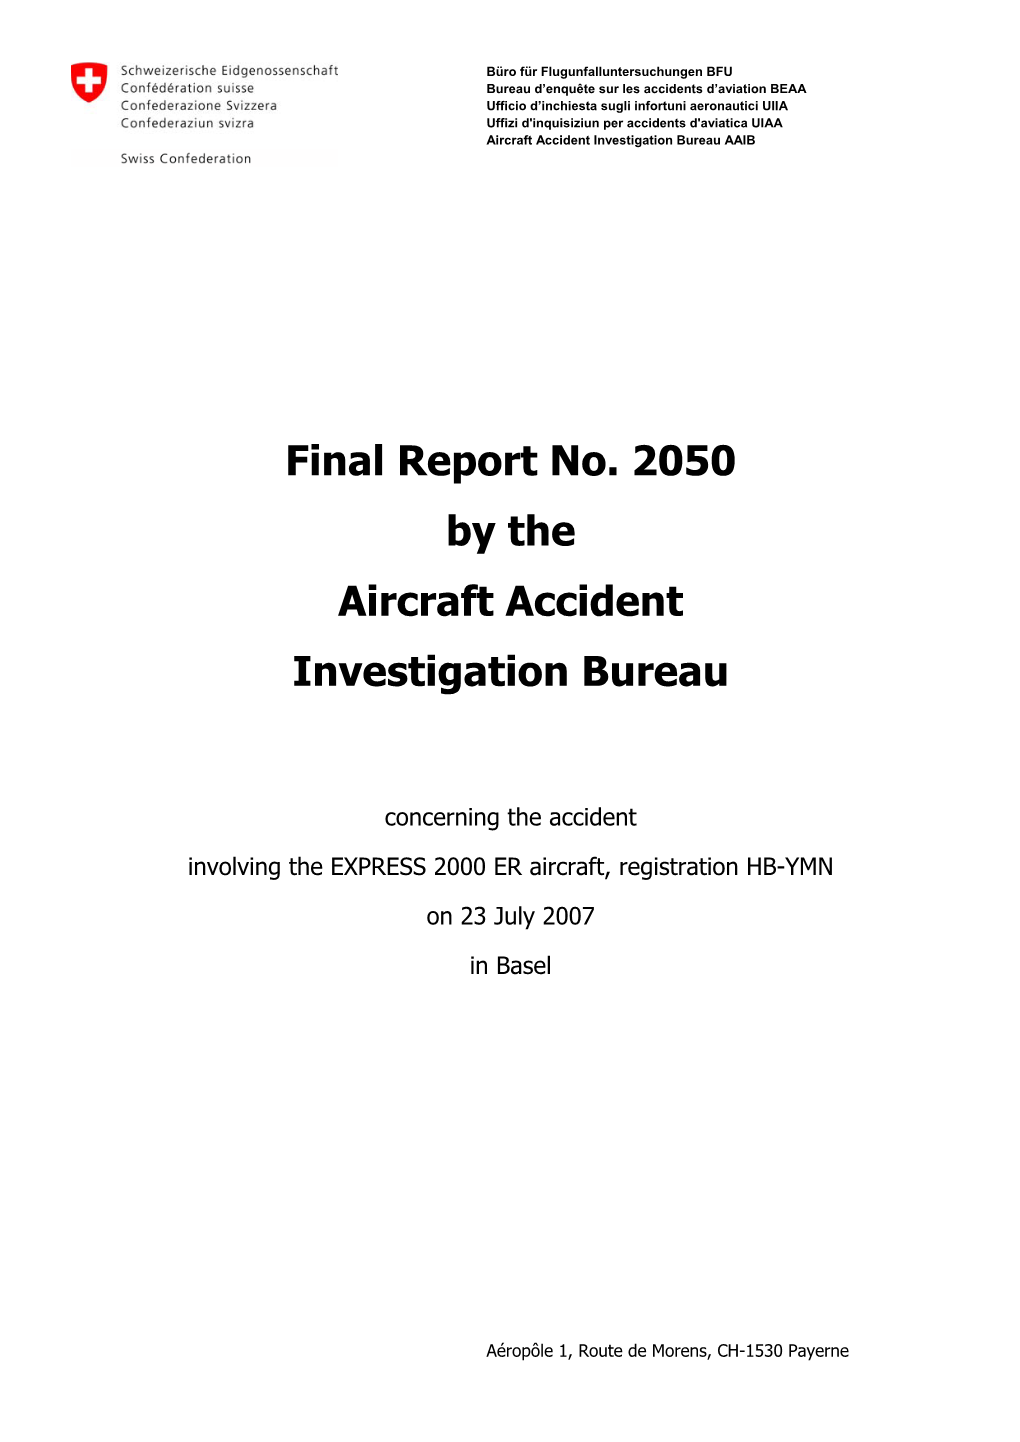 Final Report No. 2050 by the Aircraft Accident Investigation Bureau